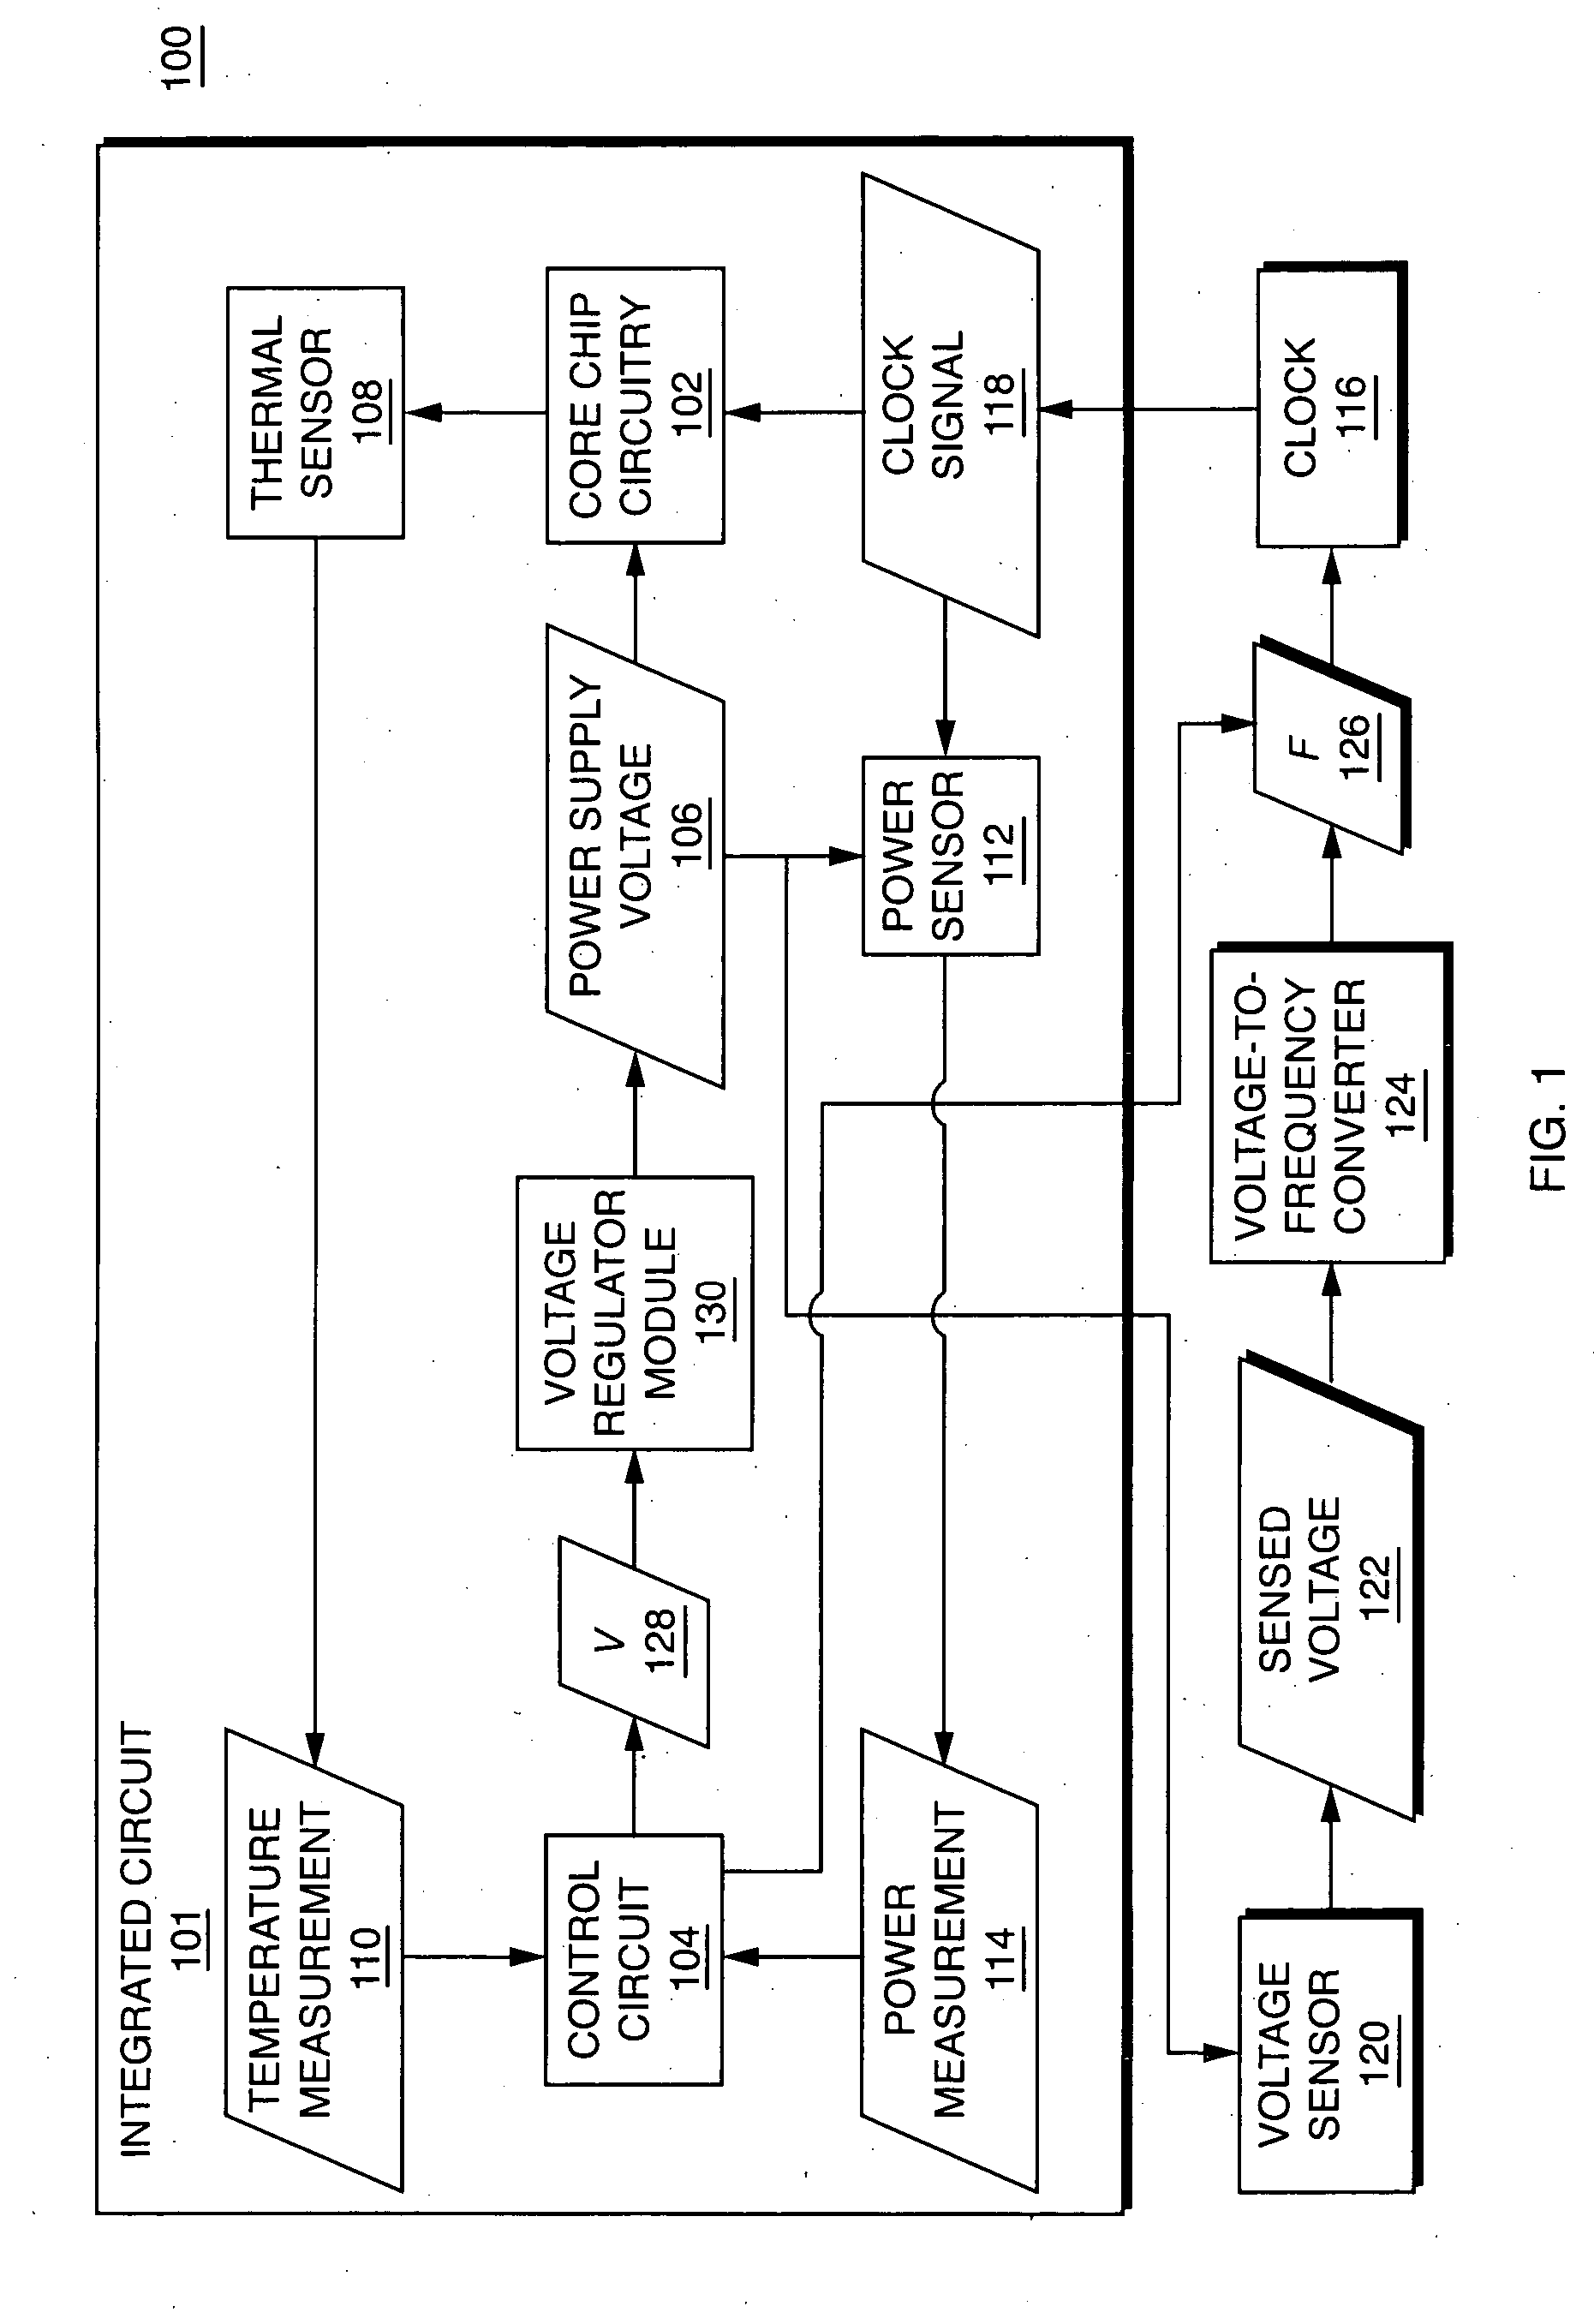 Voltage modulation for increased reliability in an integrated circuit